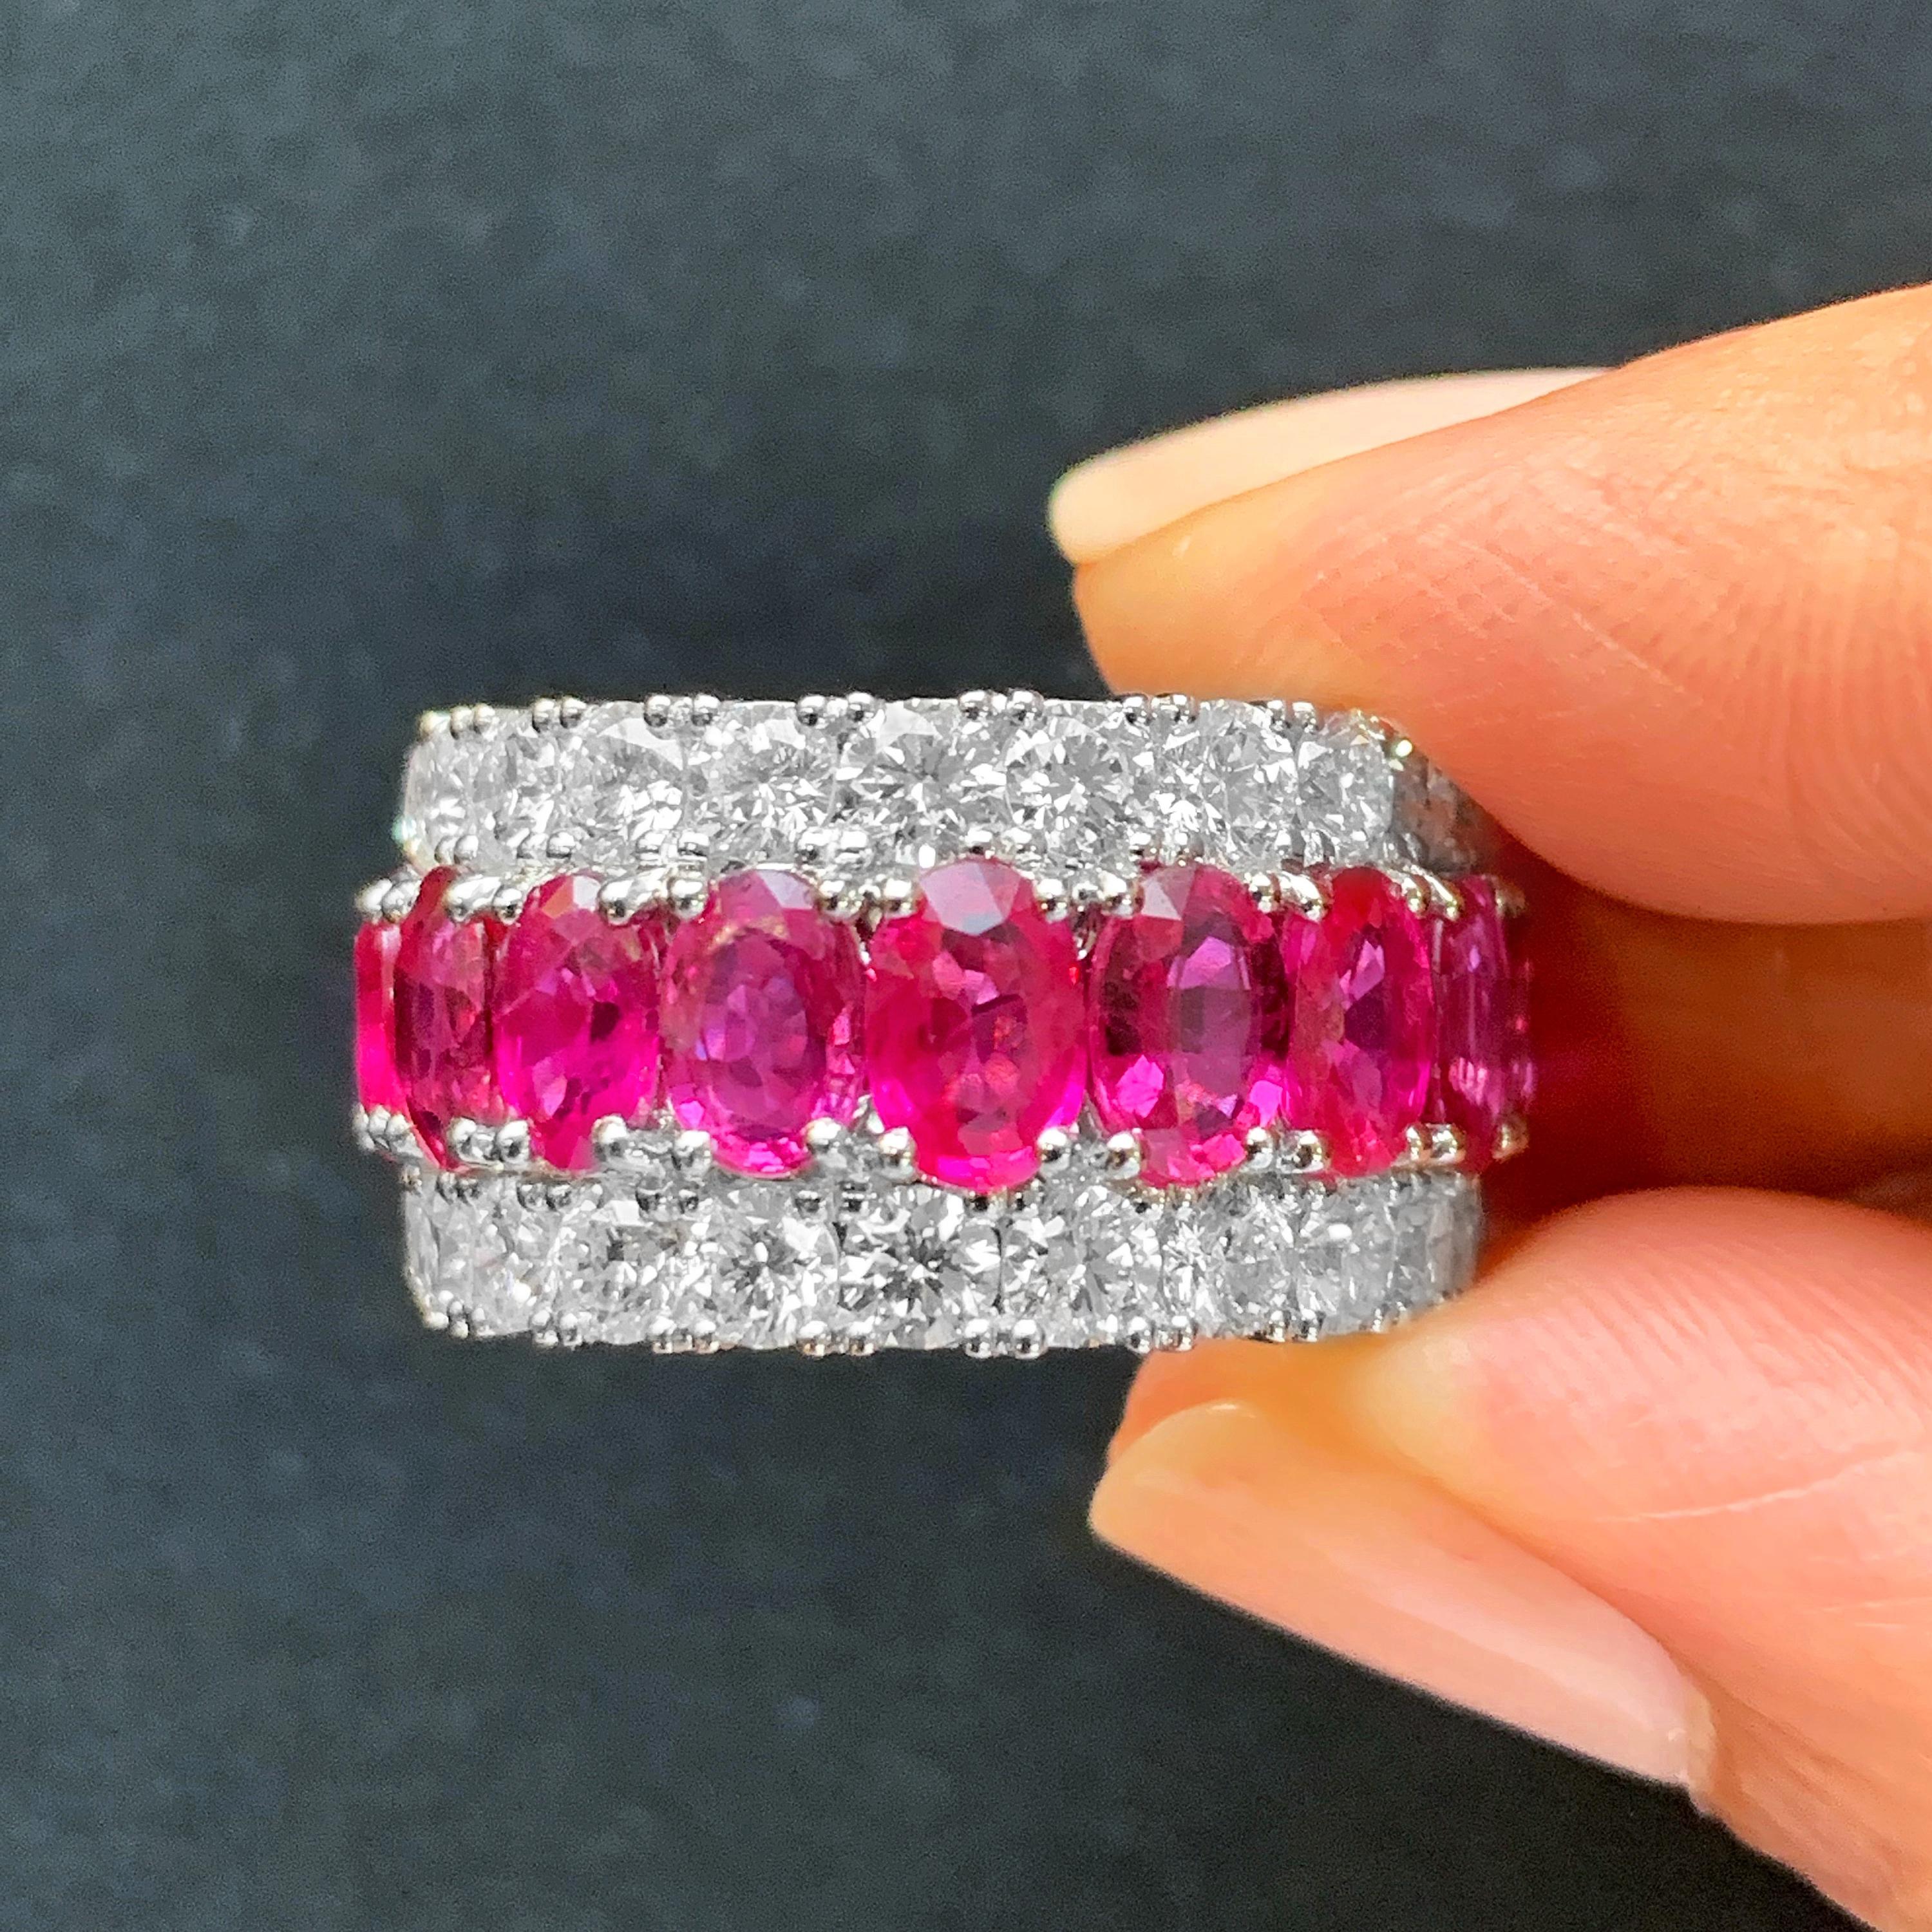 Butani's stunning diamond eternity band ring features a center row of oval red rubies (totaling 11.0 carats) and two rows of brilliant-cut round diamonds (totaling 5.02carats).  Set in 18K white gold.  A classic and timeless piece.  Currently a ring